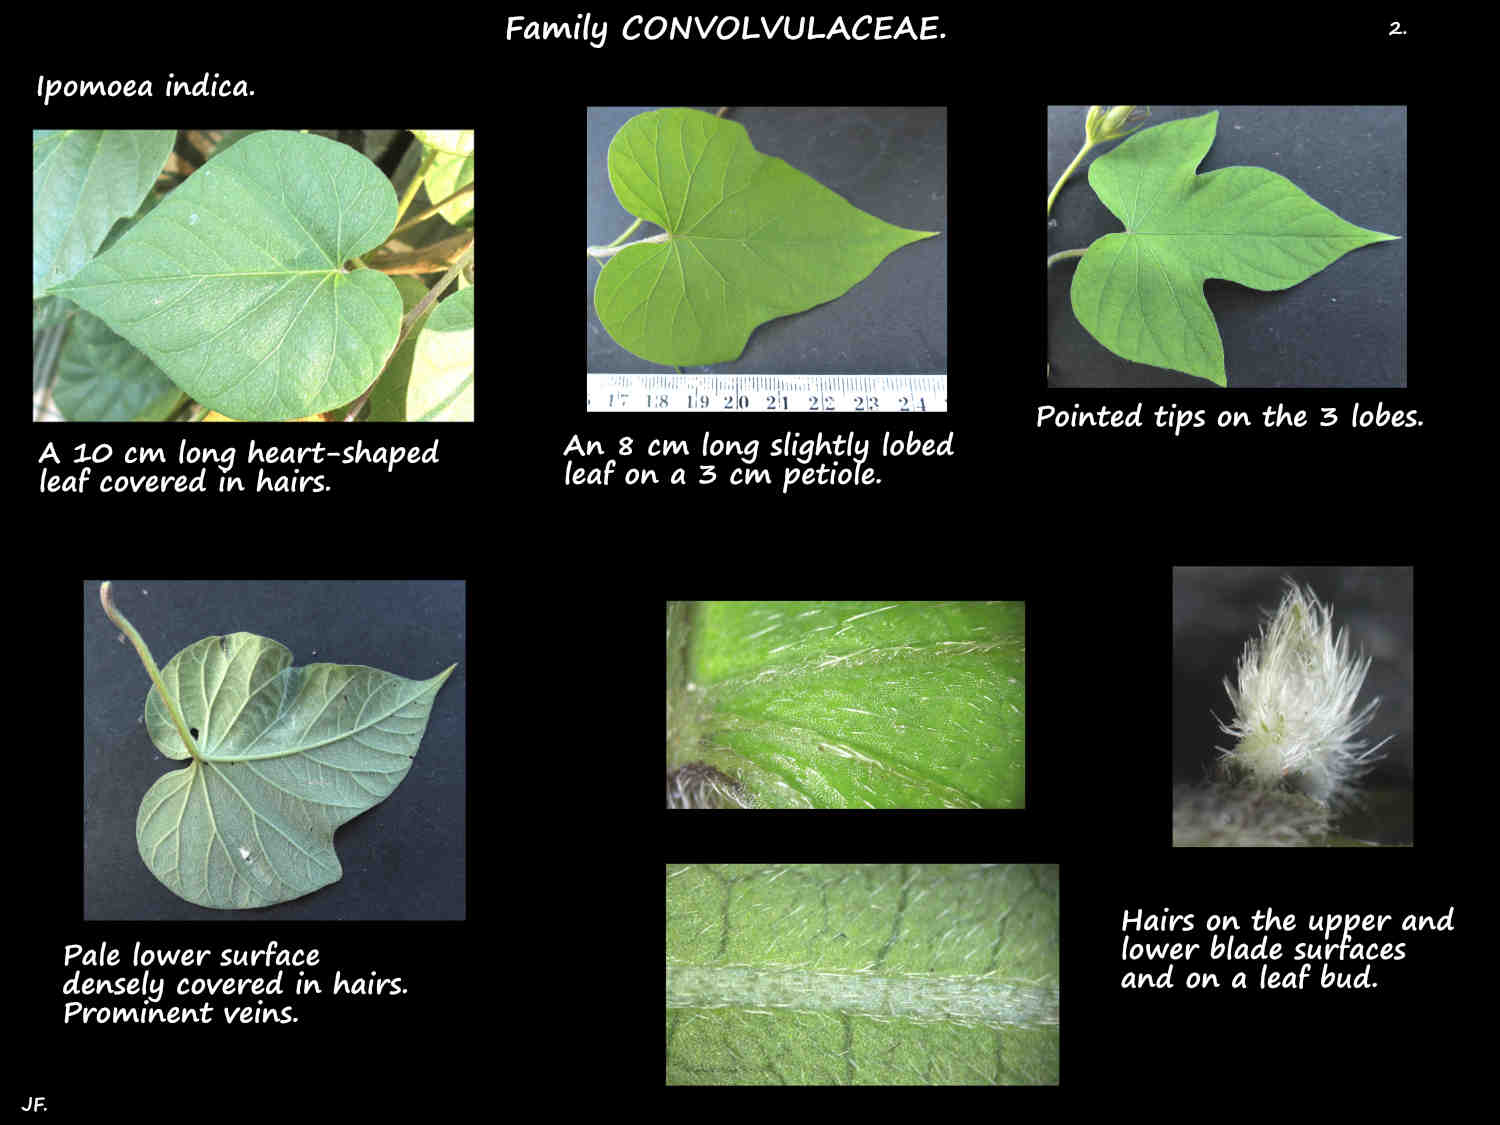 2 Ipomoea indica leaf shapes & hairs